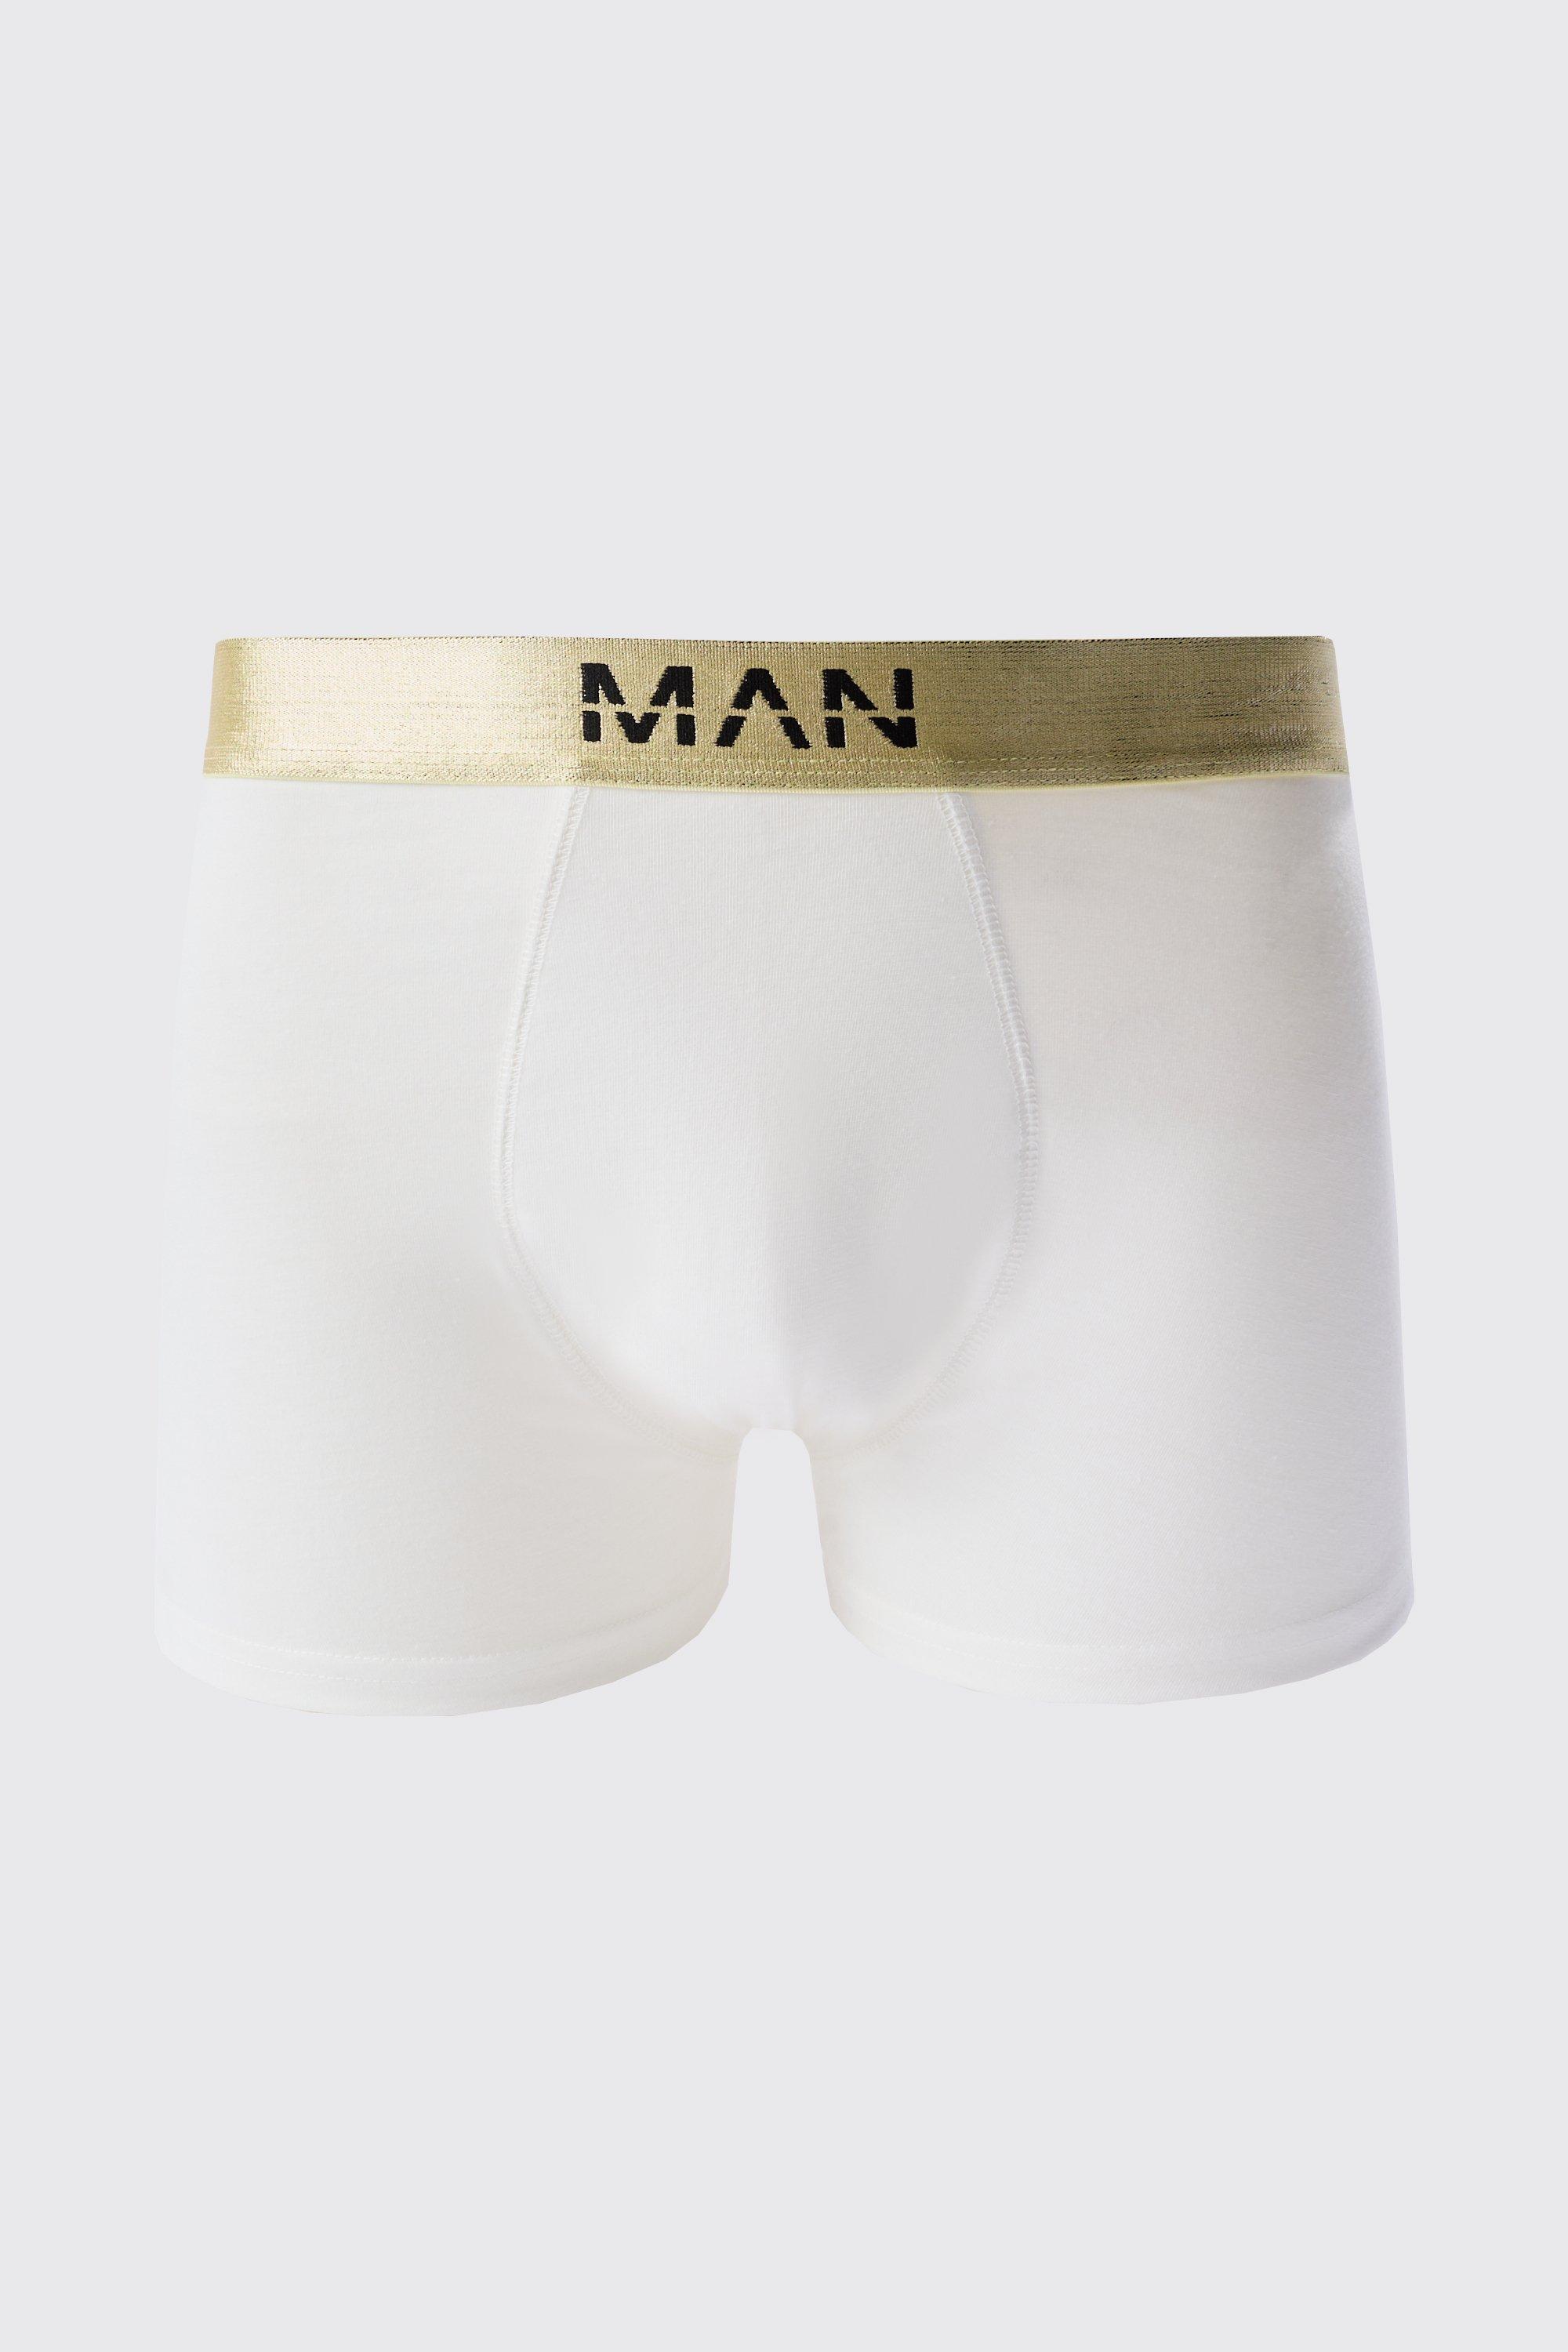 Image of 3 Pack Man Dash Gold Waistband Boxers In Multi, Multi